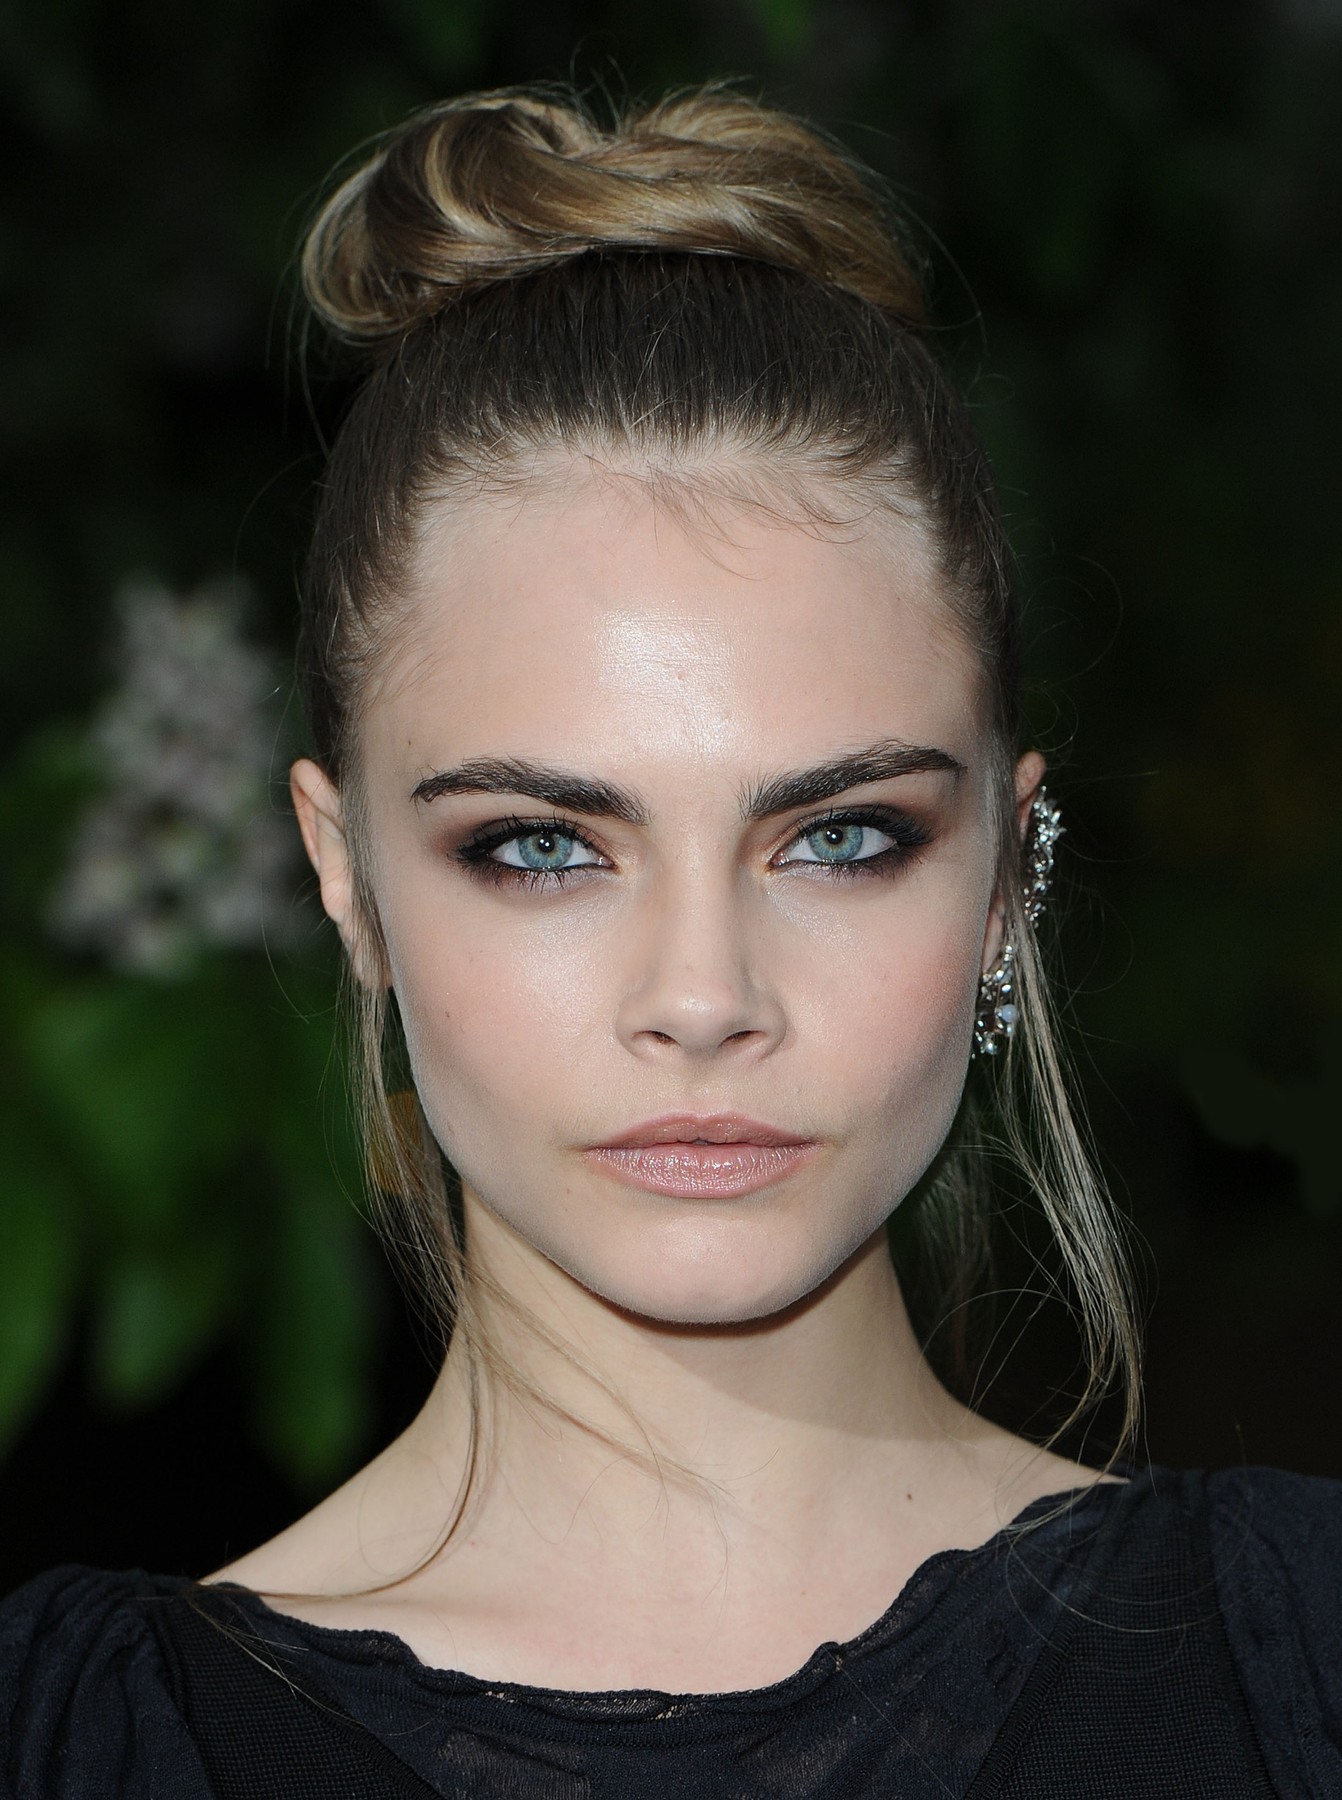 Cara Delevingne attending the Serpentine Summer Party, in Kensington Gardens, London, on Tuesday June 26,  2012., Image: 137121071, License: Rights-managed, Restrictions: , Model Release: no, Credit line: Pete Mariner / MirrorPix / Profimedia